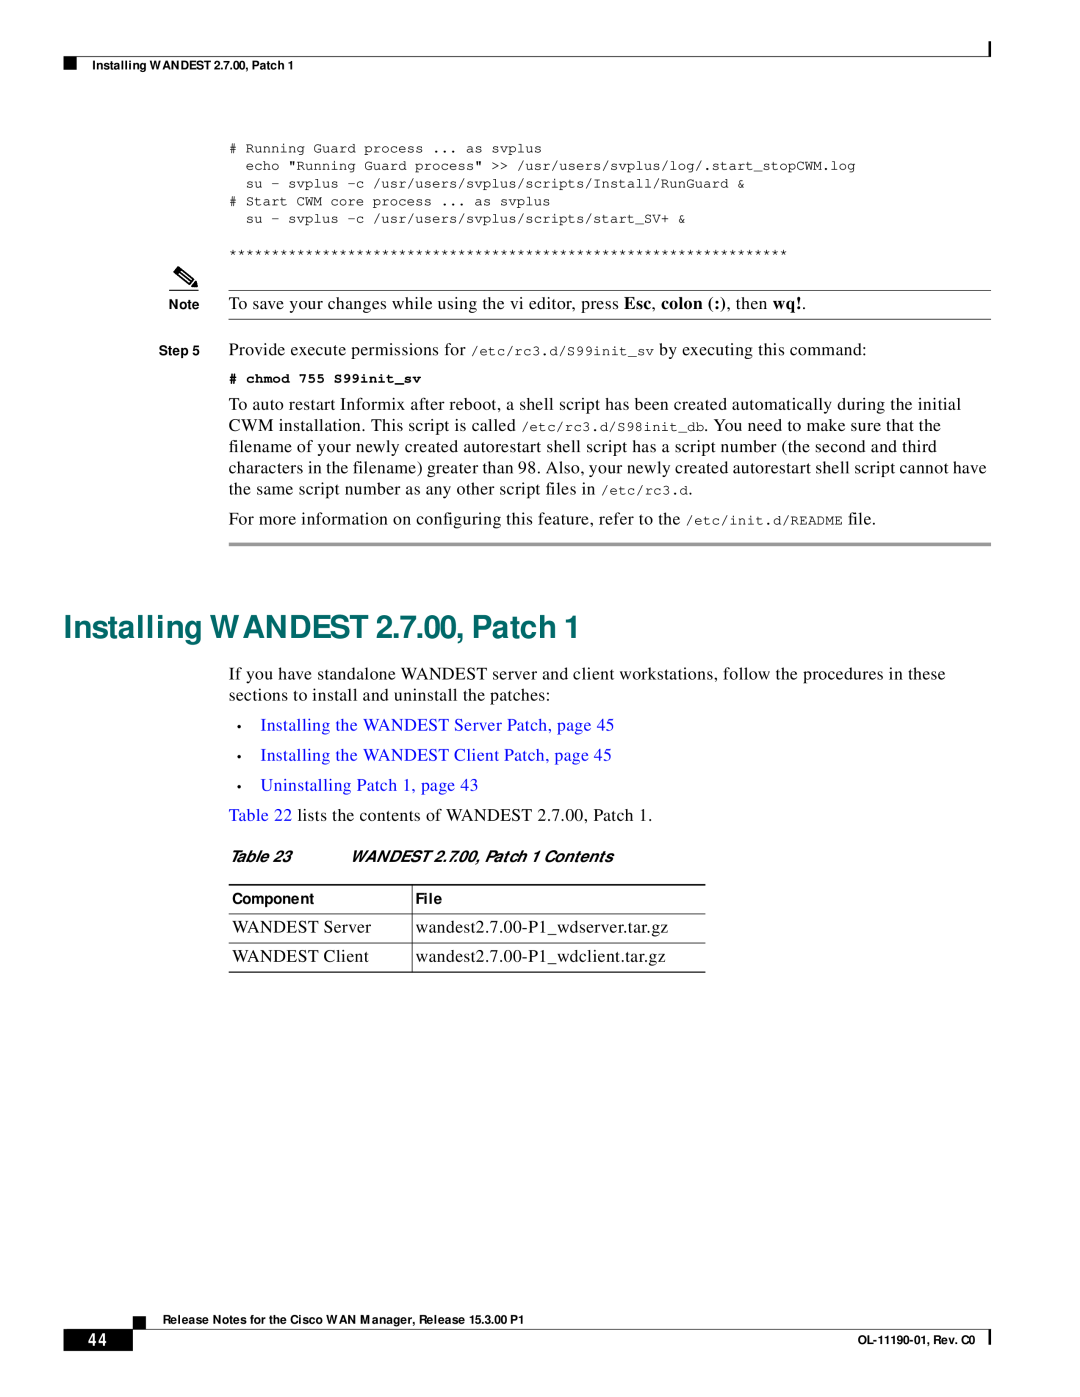 Cisco Systems 15.3.00P1 manual Installing WANDEST 2.7.00, Patch, Installing the WANDEST Server Patch, page 